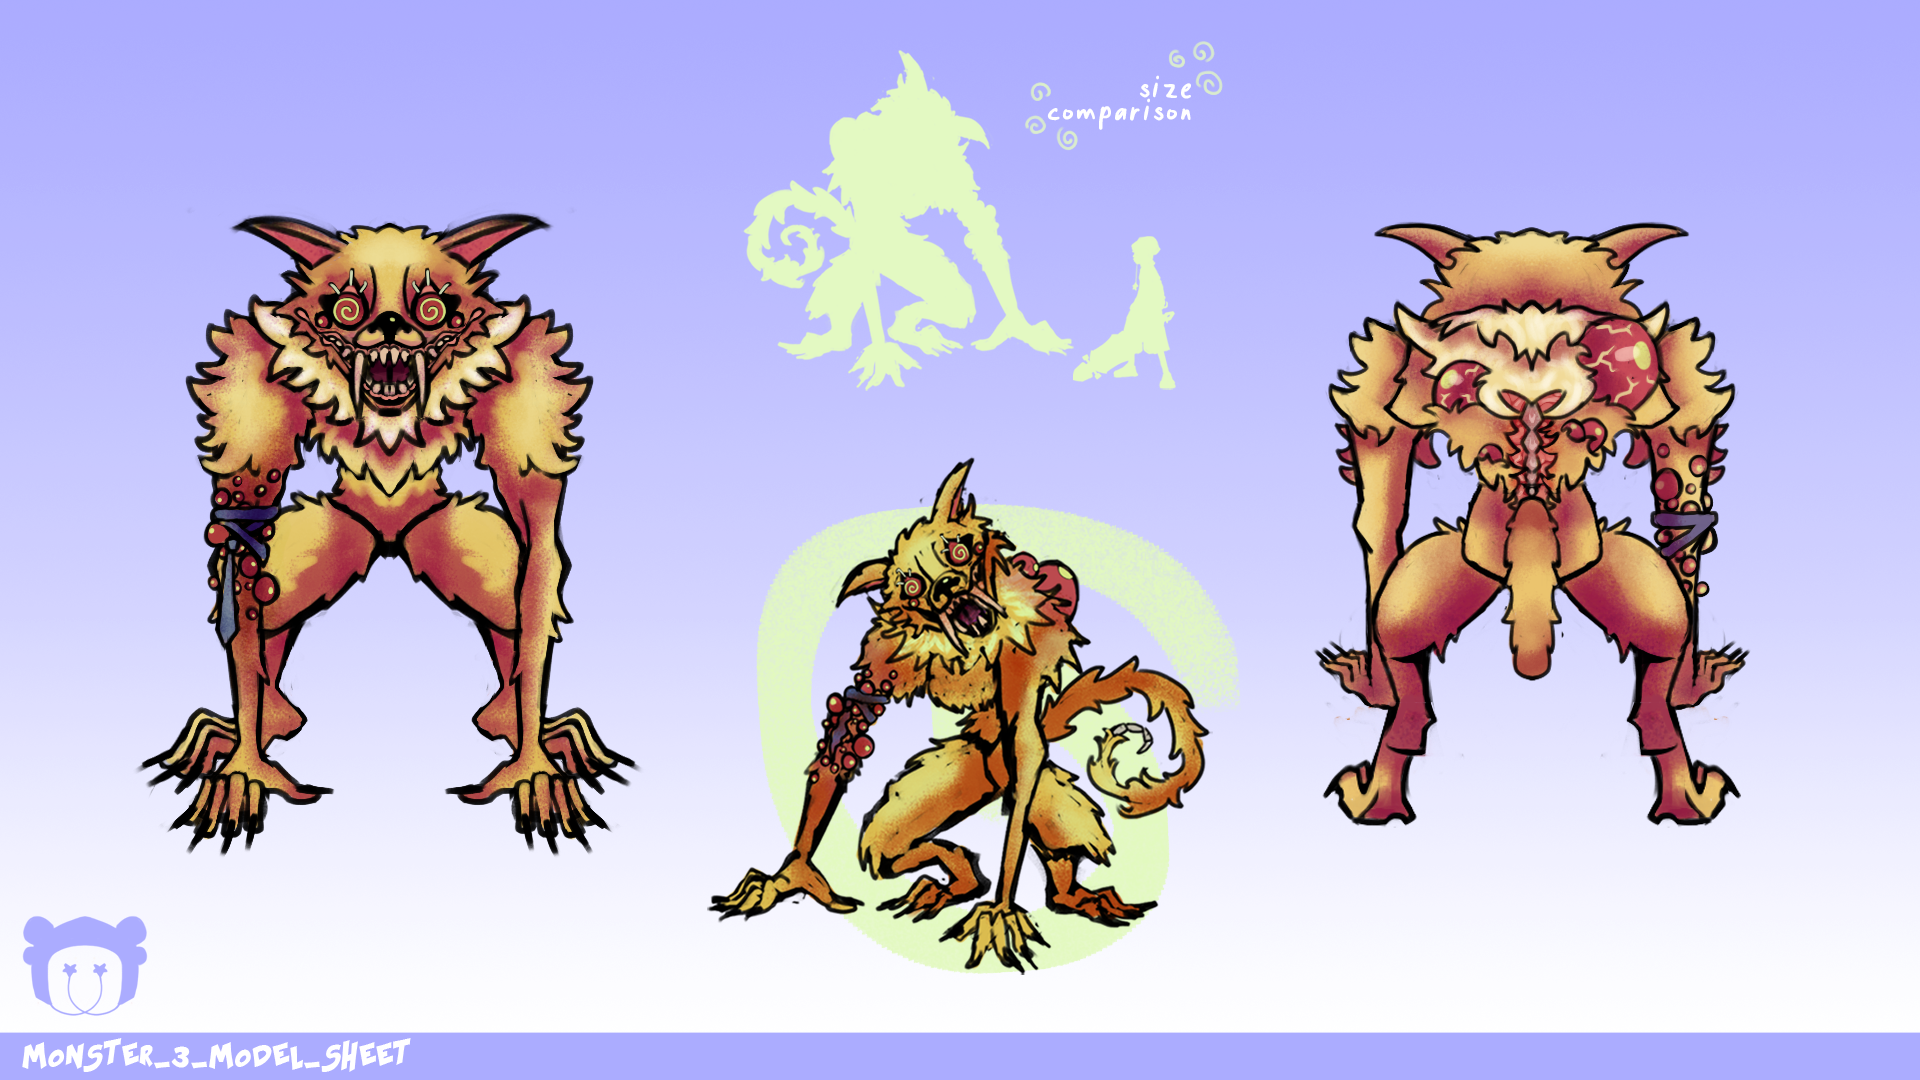 Model Sheet by Zel Hallam, depicting the final design of the yellow, fox-like monster.